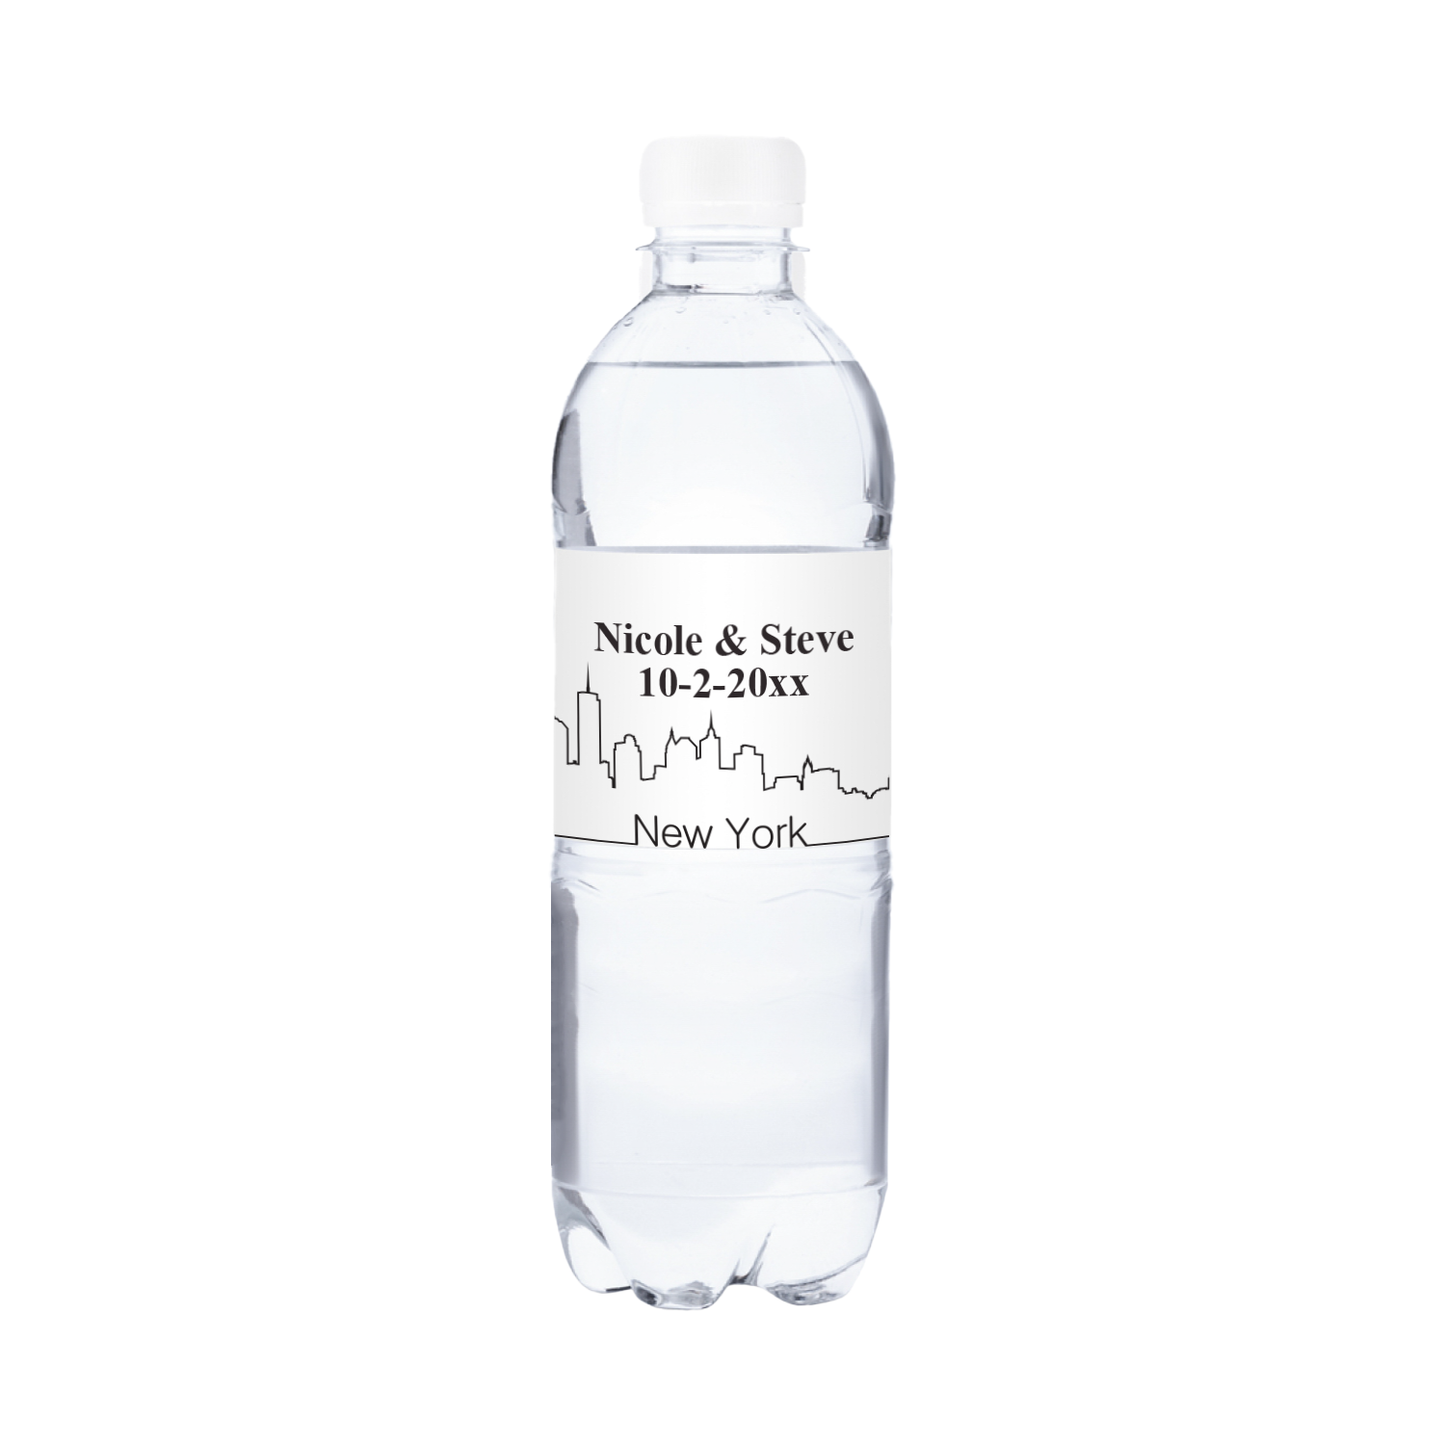 New York Outline Wedding Waterproof Personalized Water Bottle Labels (set of 15)